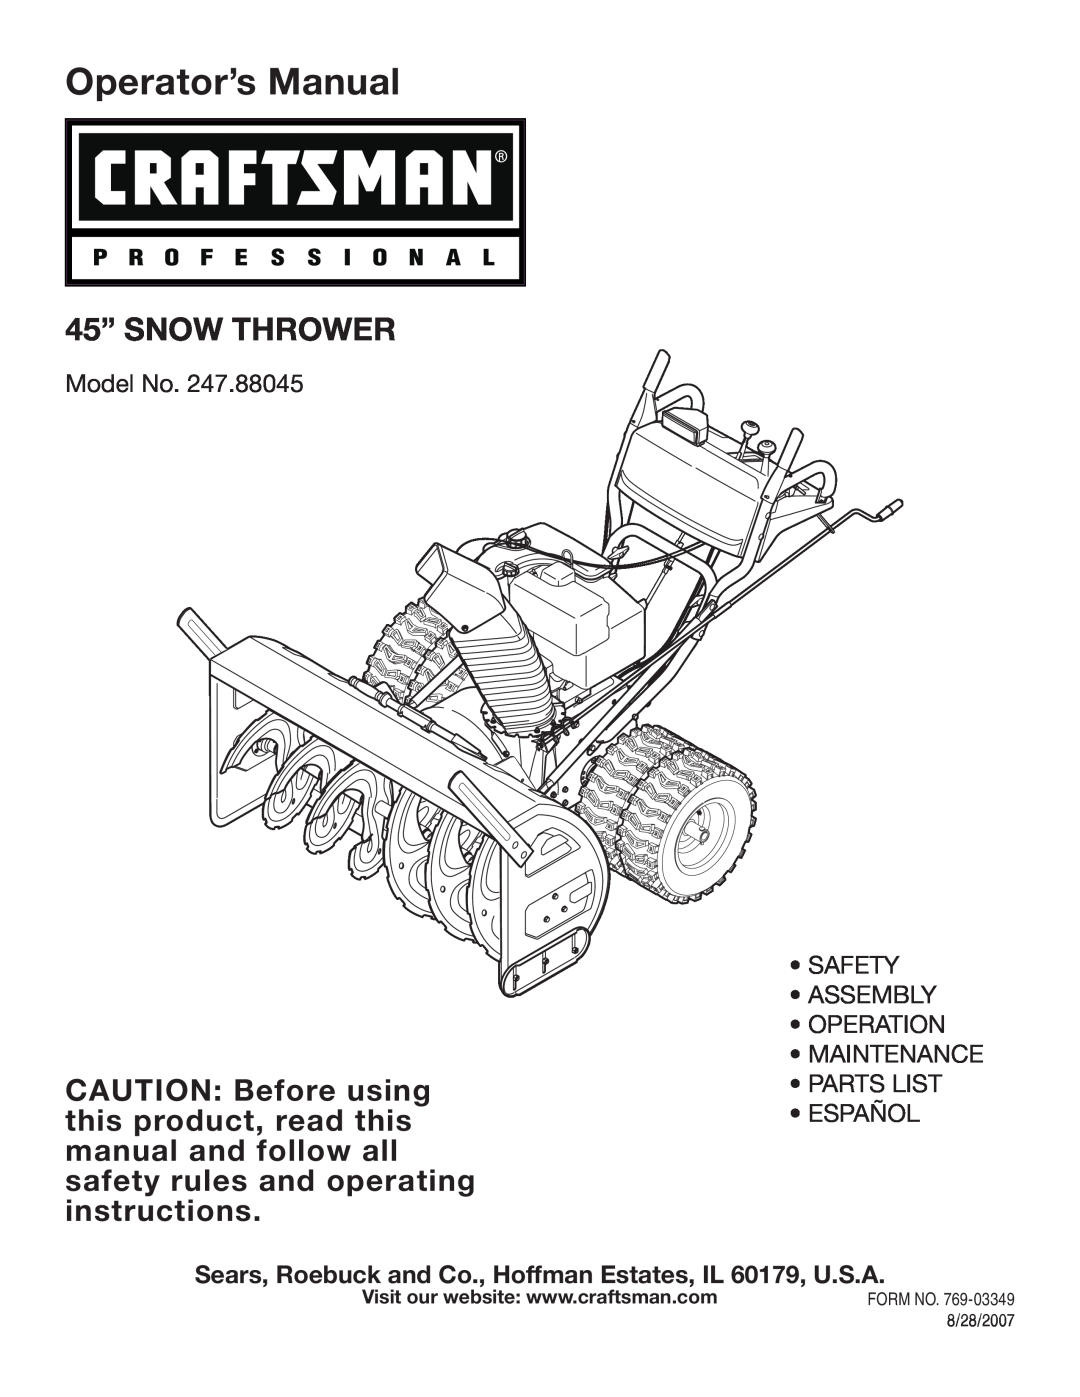 Craftsman 247.88045 manual Sears, Roebuck and Co., Hoffman Estates, IL 60179, U.S.A, Operator’s Manual, 45” SNOW THROWER 